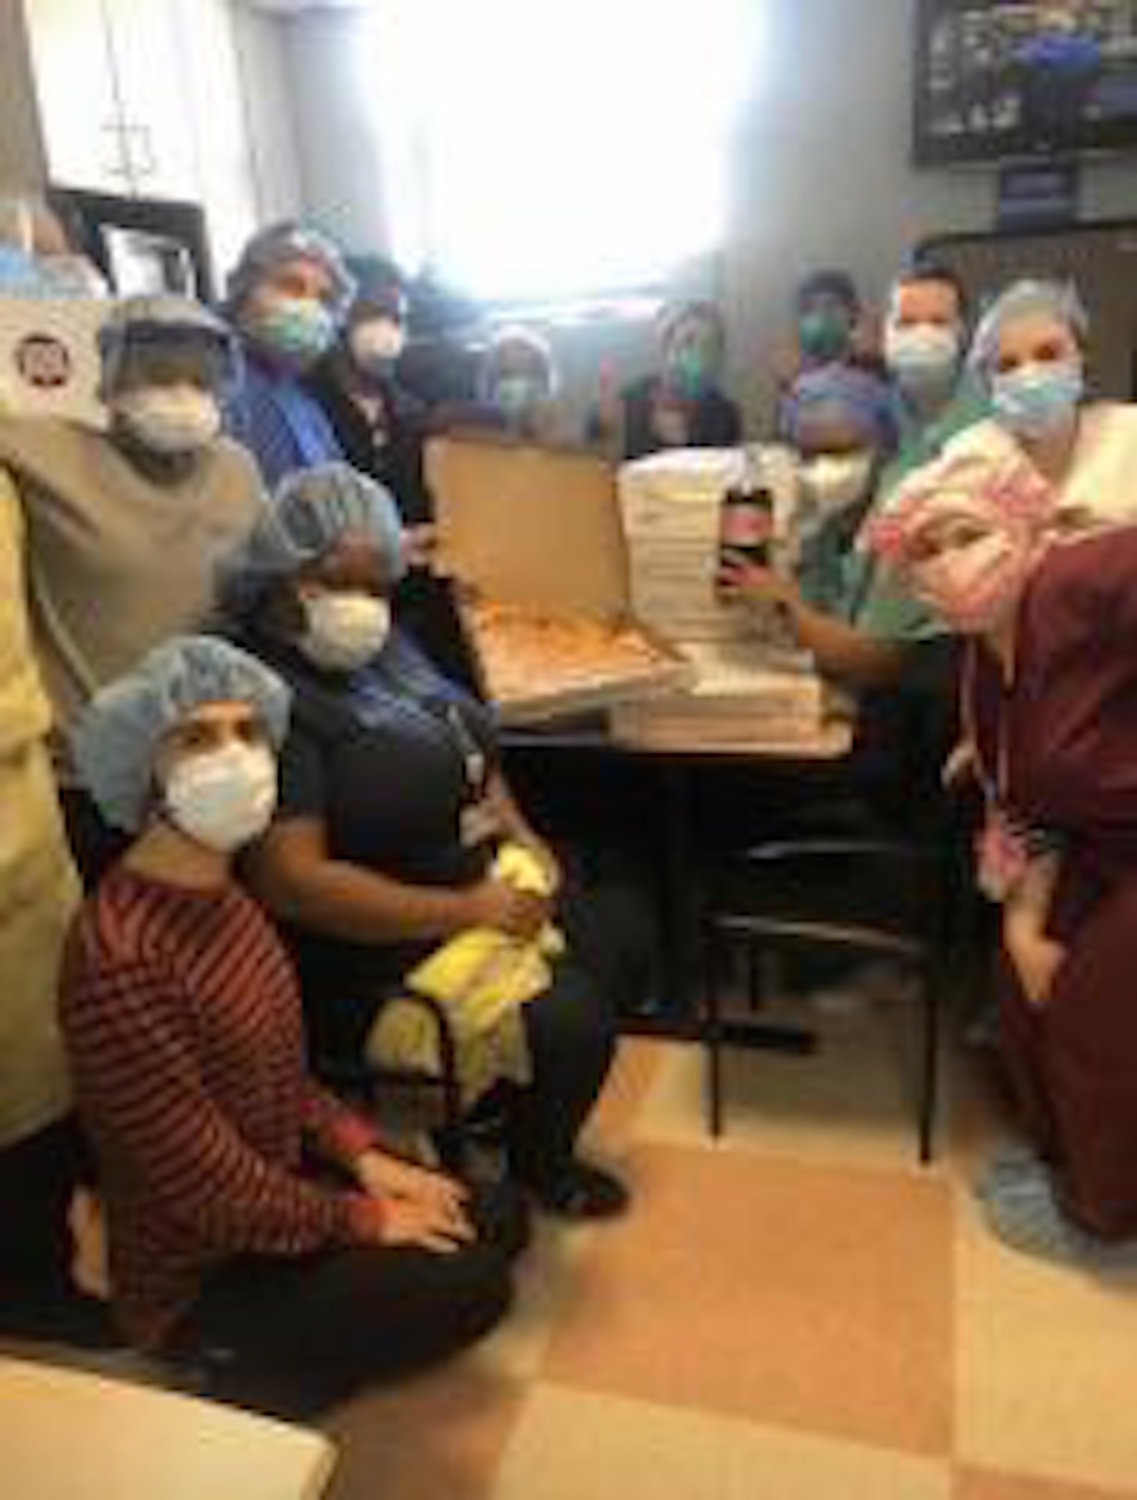 Villa Formia pizzeria in Lynbrook donated pizza pies to Mercy Medical Center in Rockville Centre, Mount Sinai South Nassau hospital in Oceanside and Northwell Health Long Island Jewish Valley Stream.